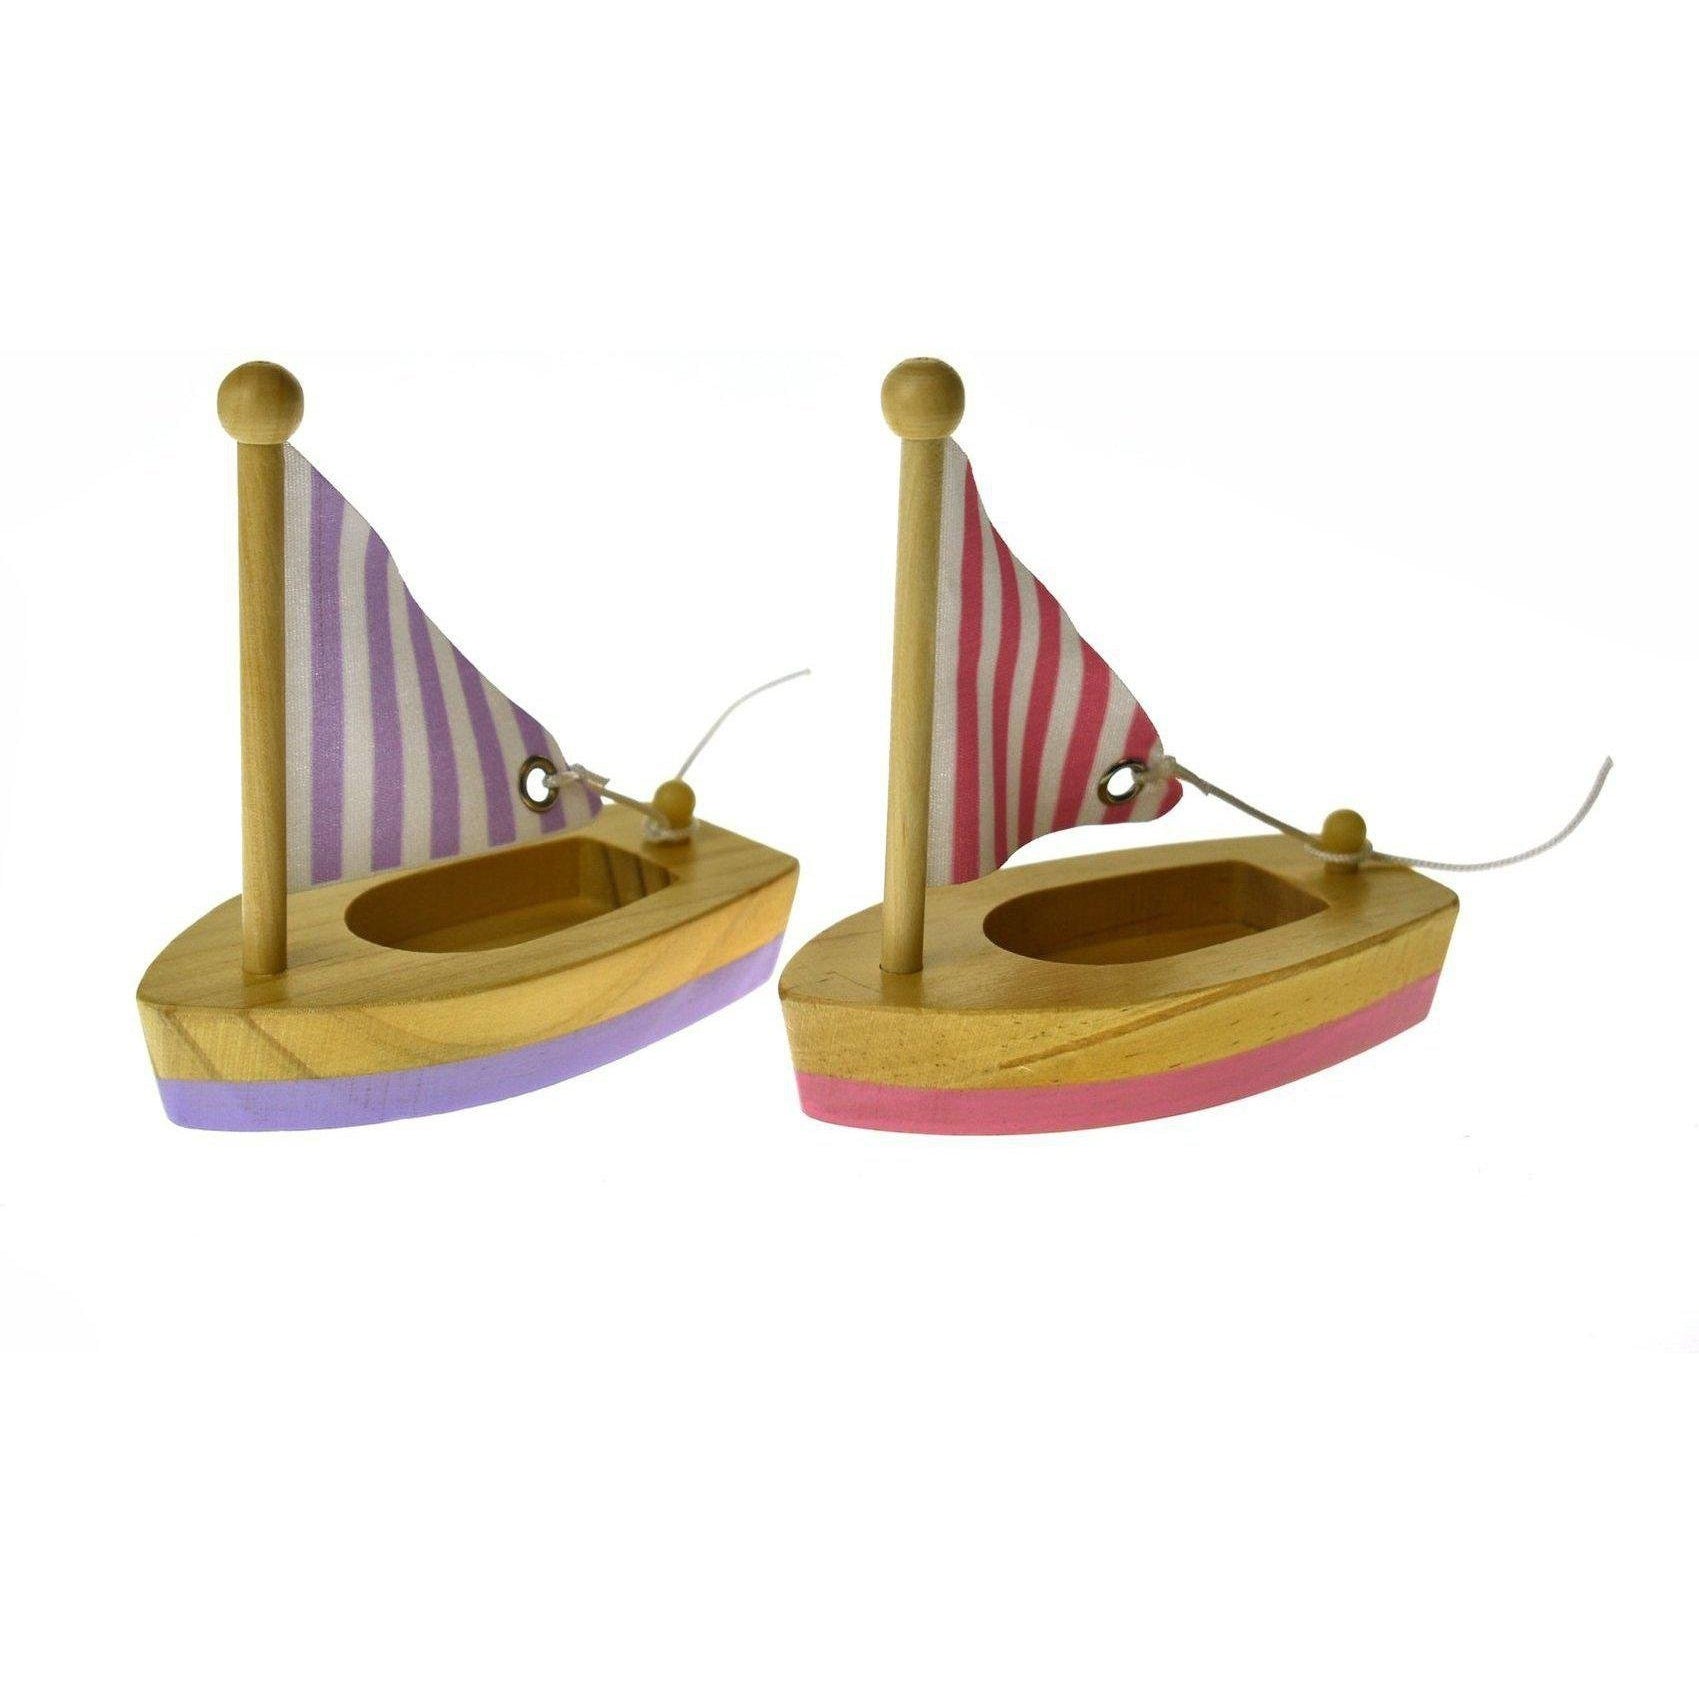 Calm and Breezy Wooden Small Sailboat